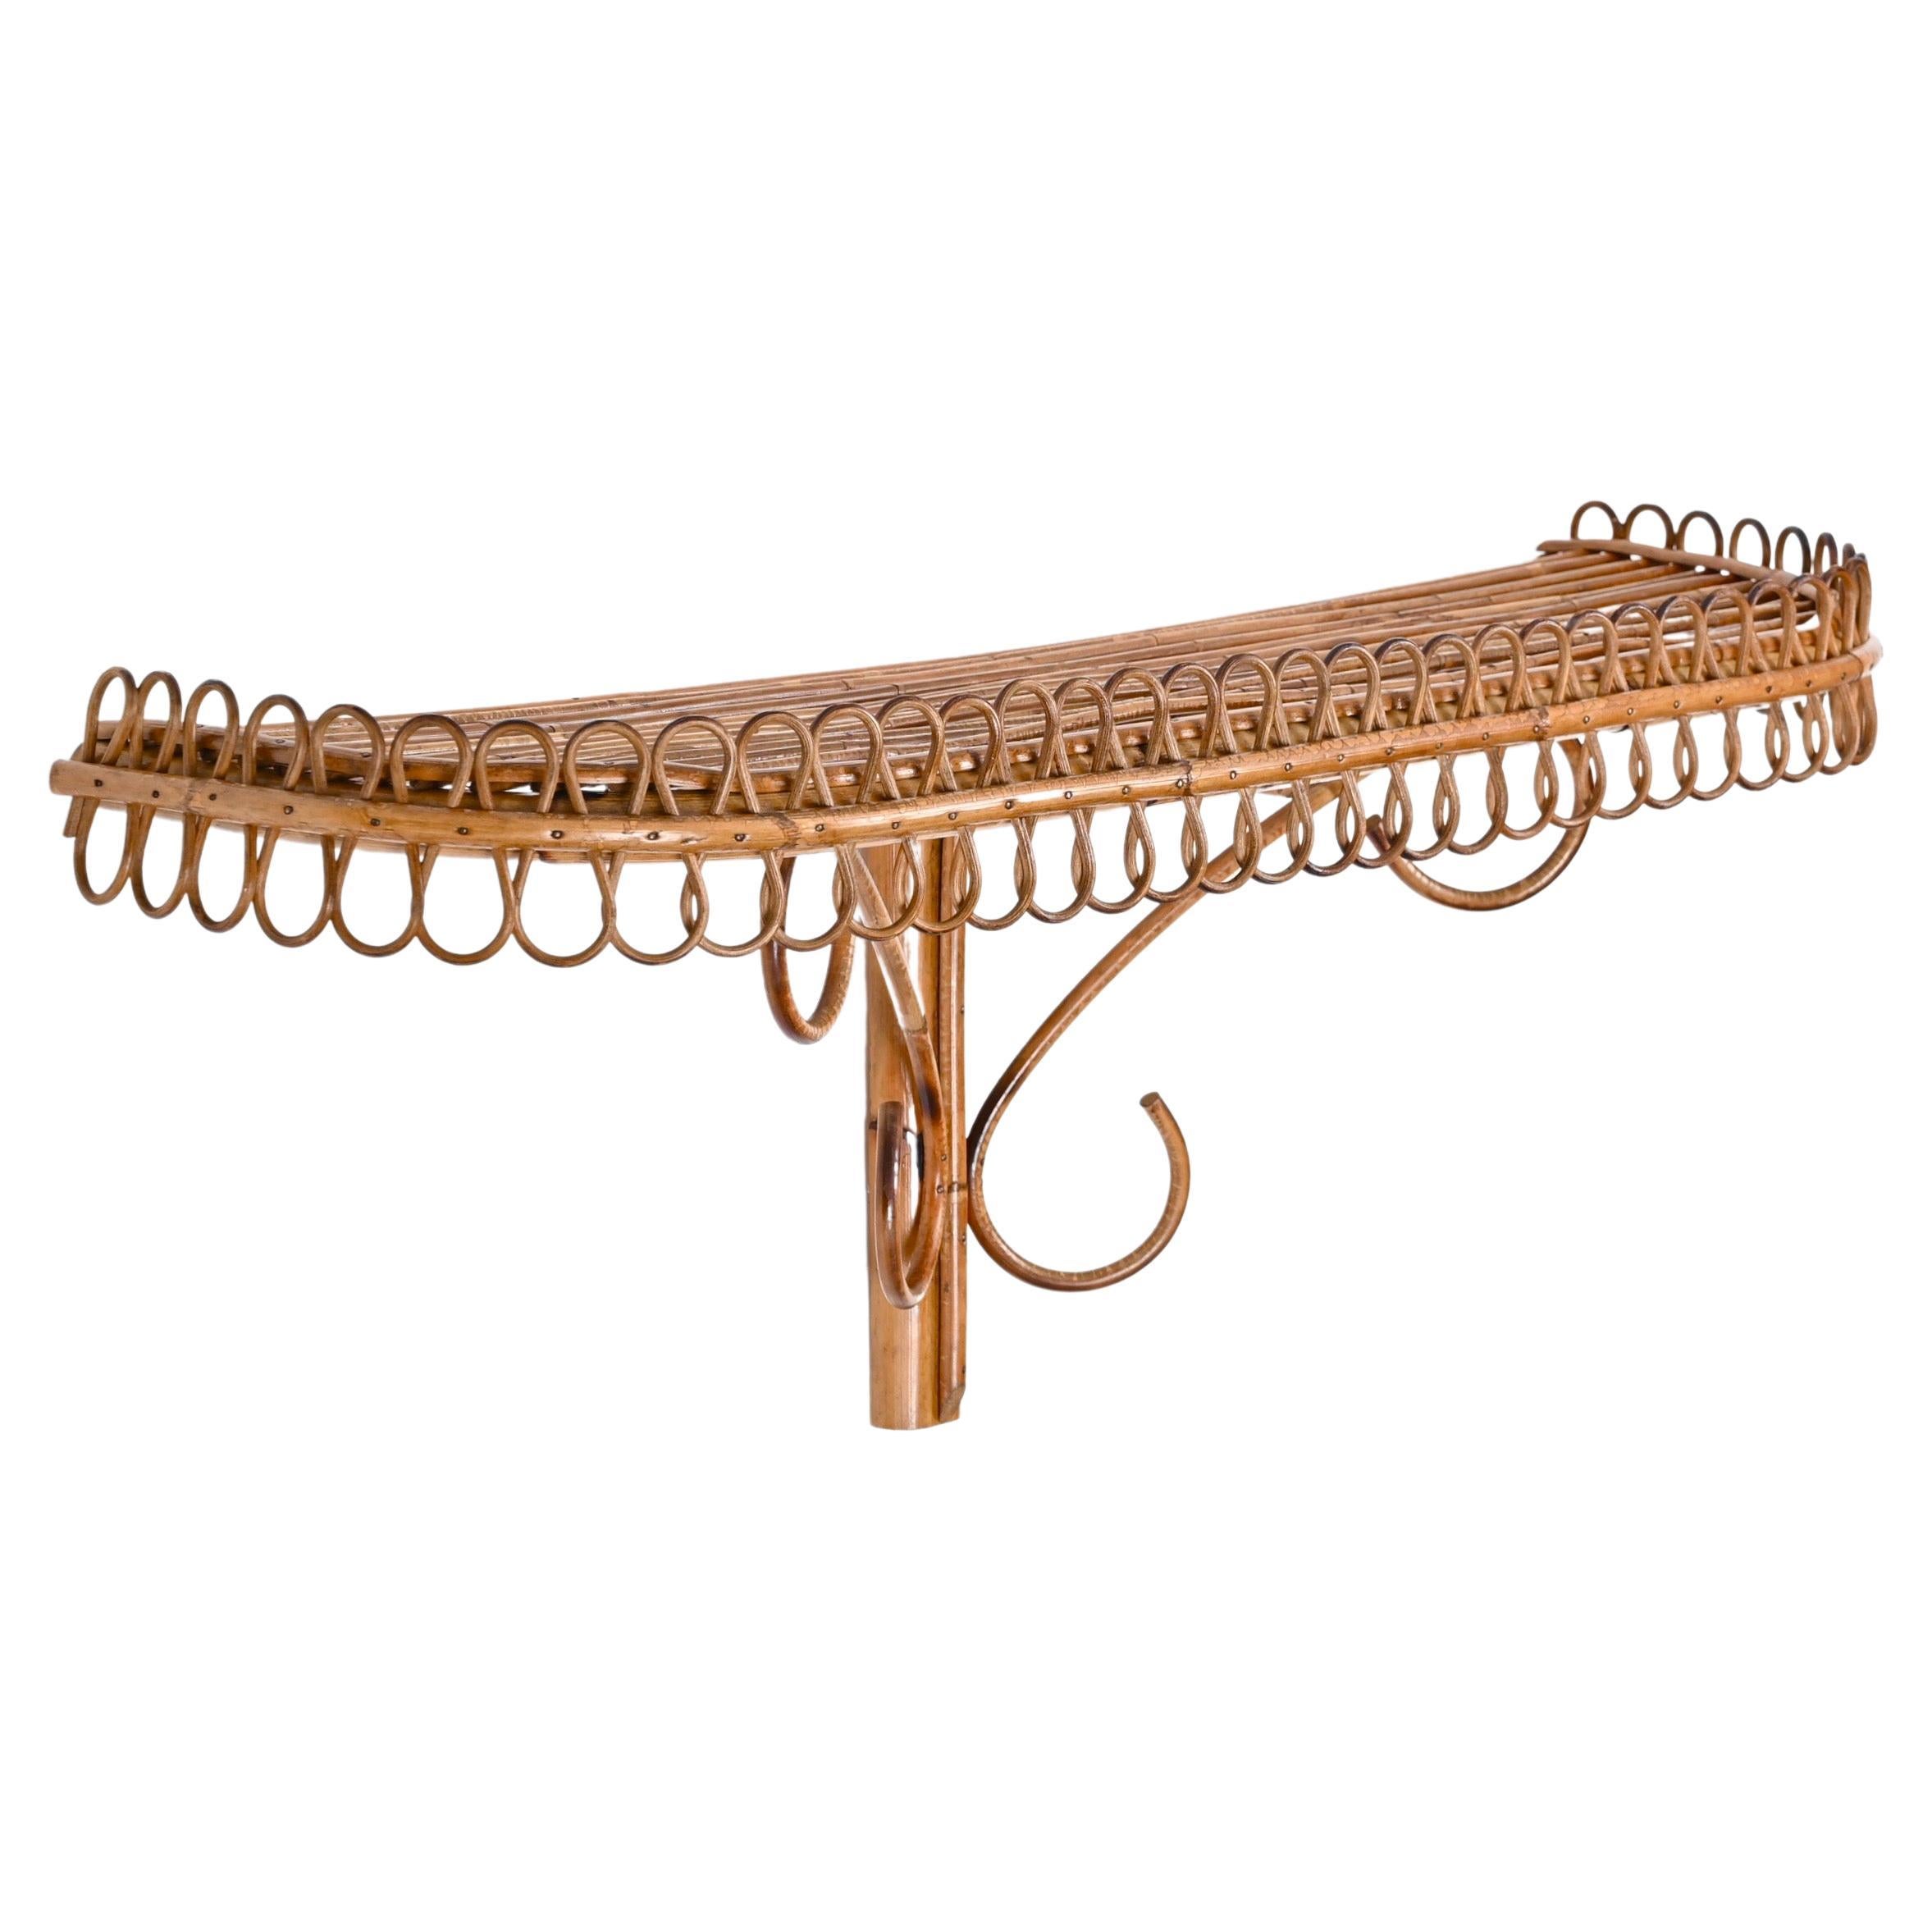 Midcentury Wall Shelf or Console, Rattan and Bamboo, Franco Albini, Italy, 1960s